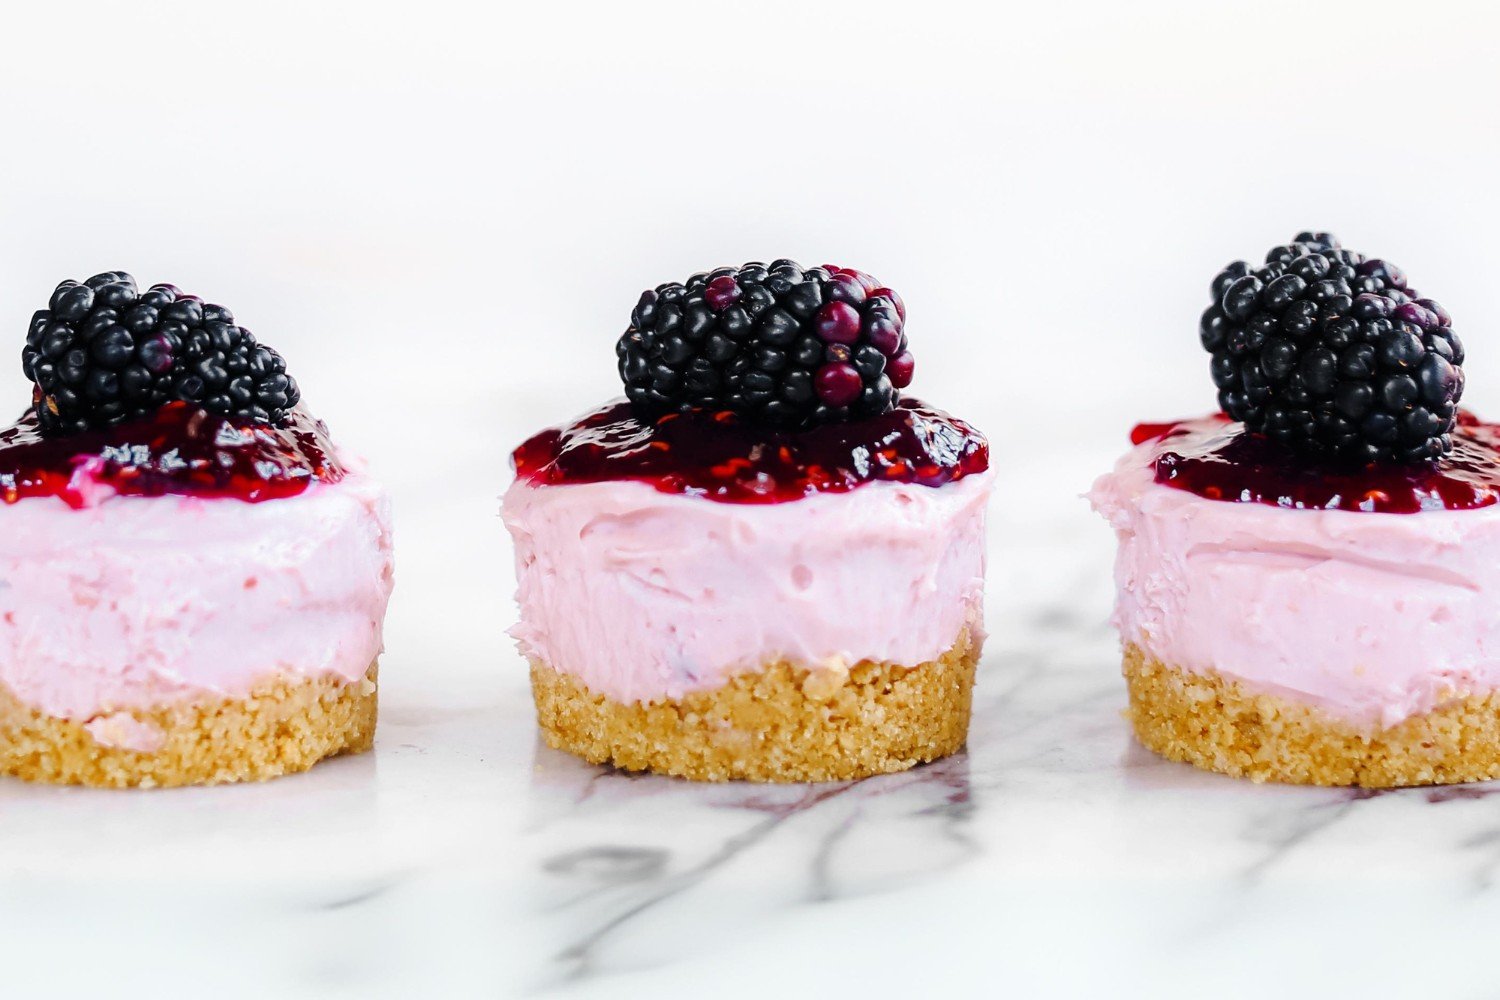 three three No Bake Mini Blackberry Cheesecakes in a row, with a fresh blackberry on top of each, ready to serve.